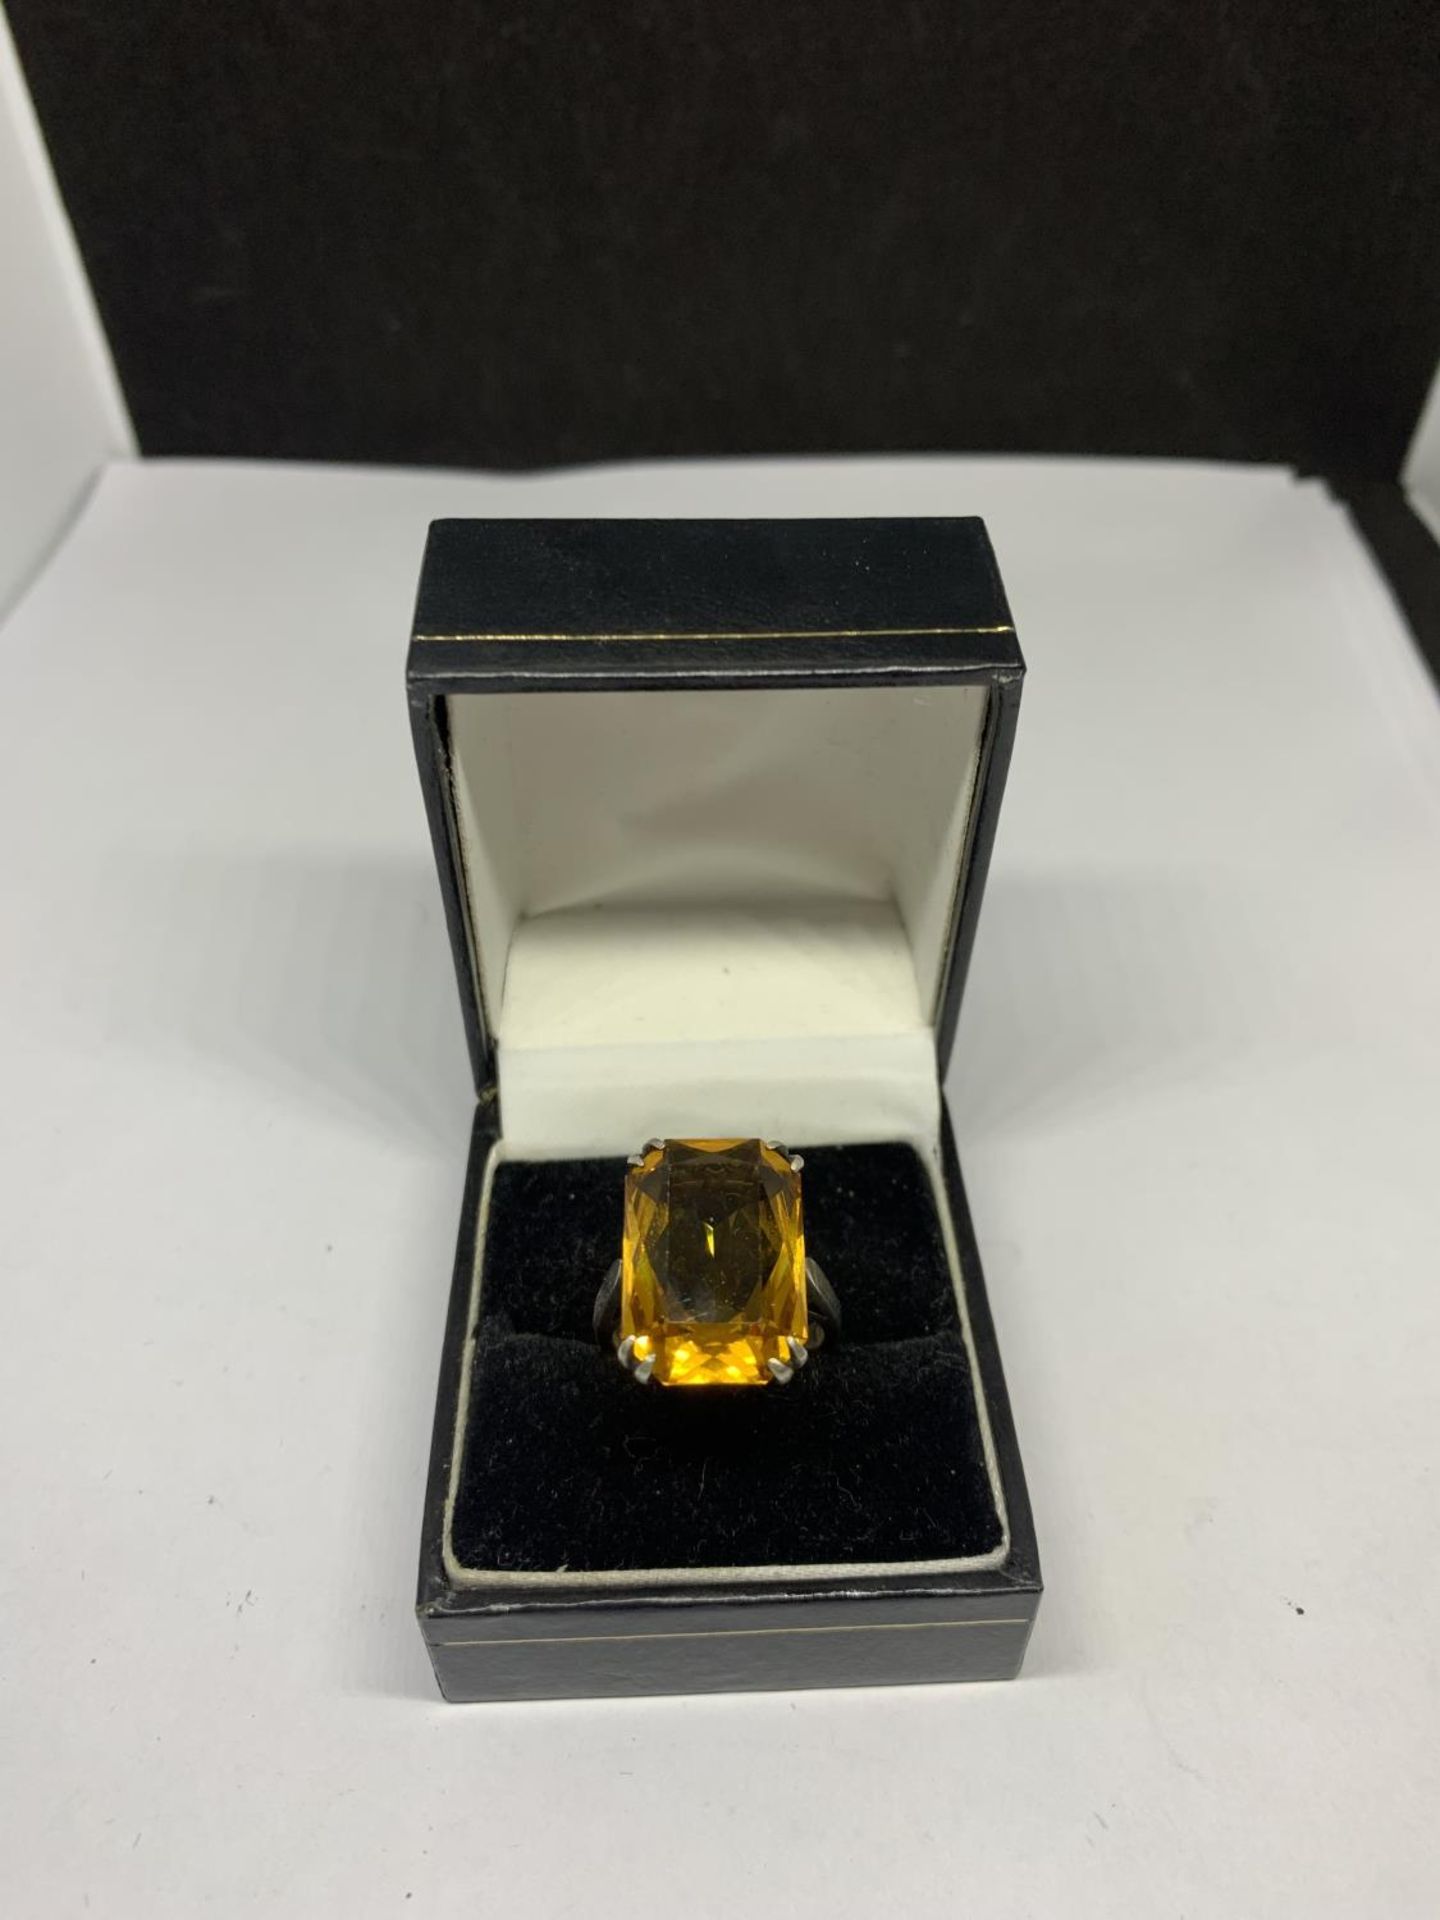 A SILVER AND YELLOW STONE RING IN A PRESENTATION BOX